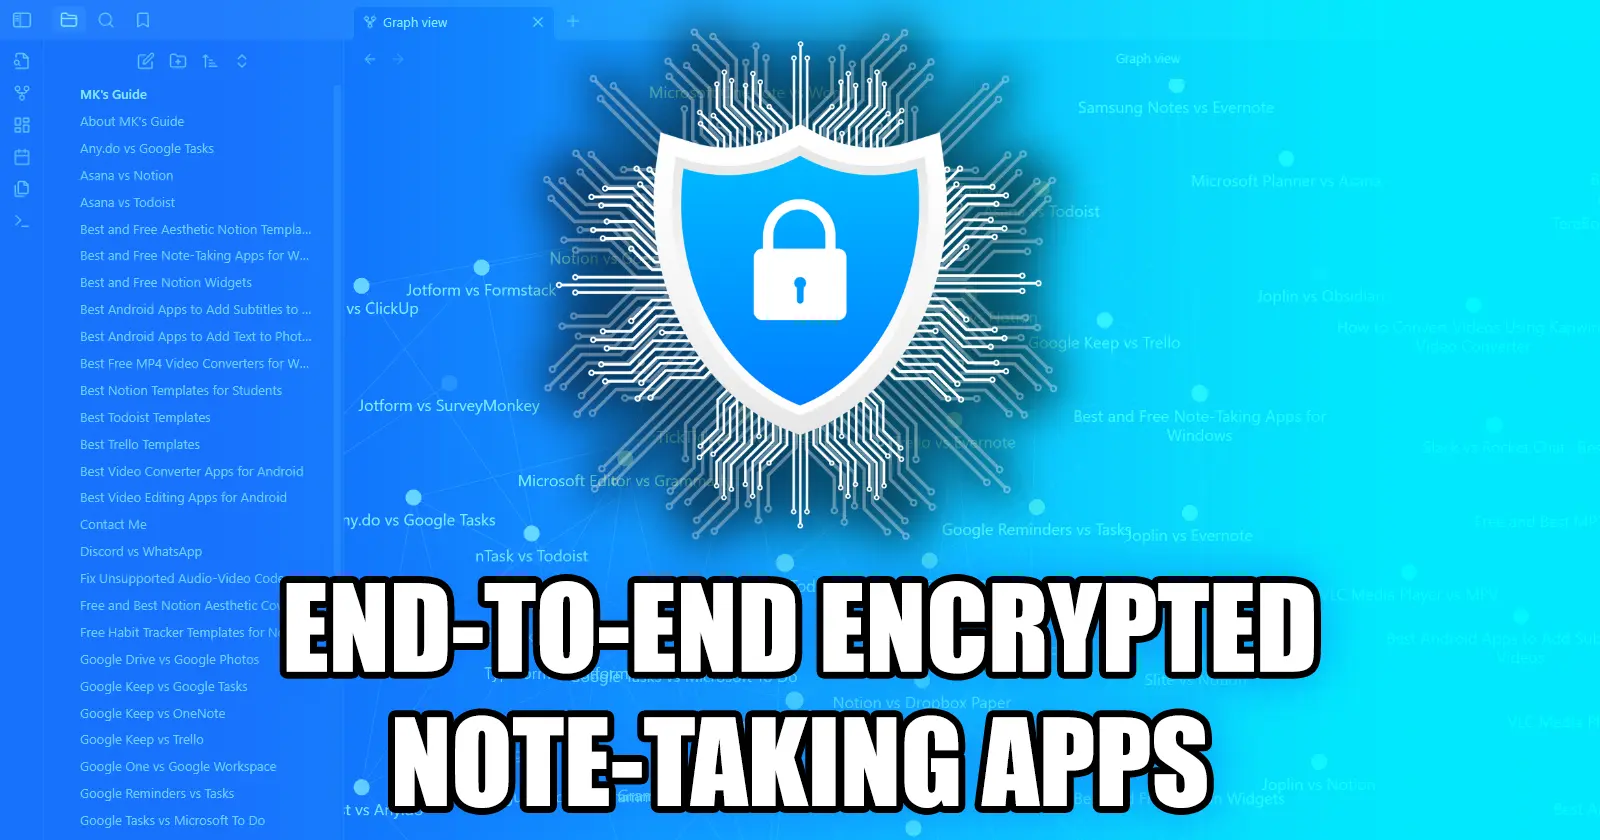 6 Best End-to-End Encrypted Note-Taking Apps